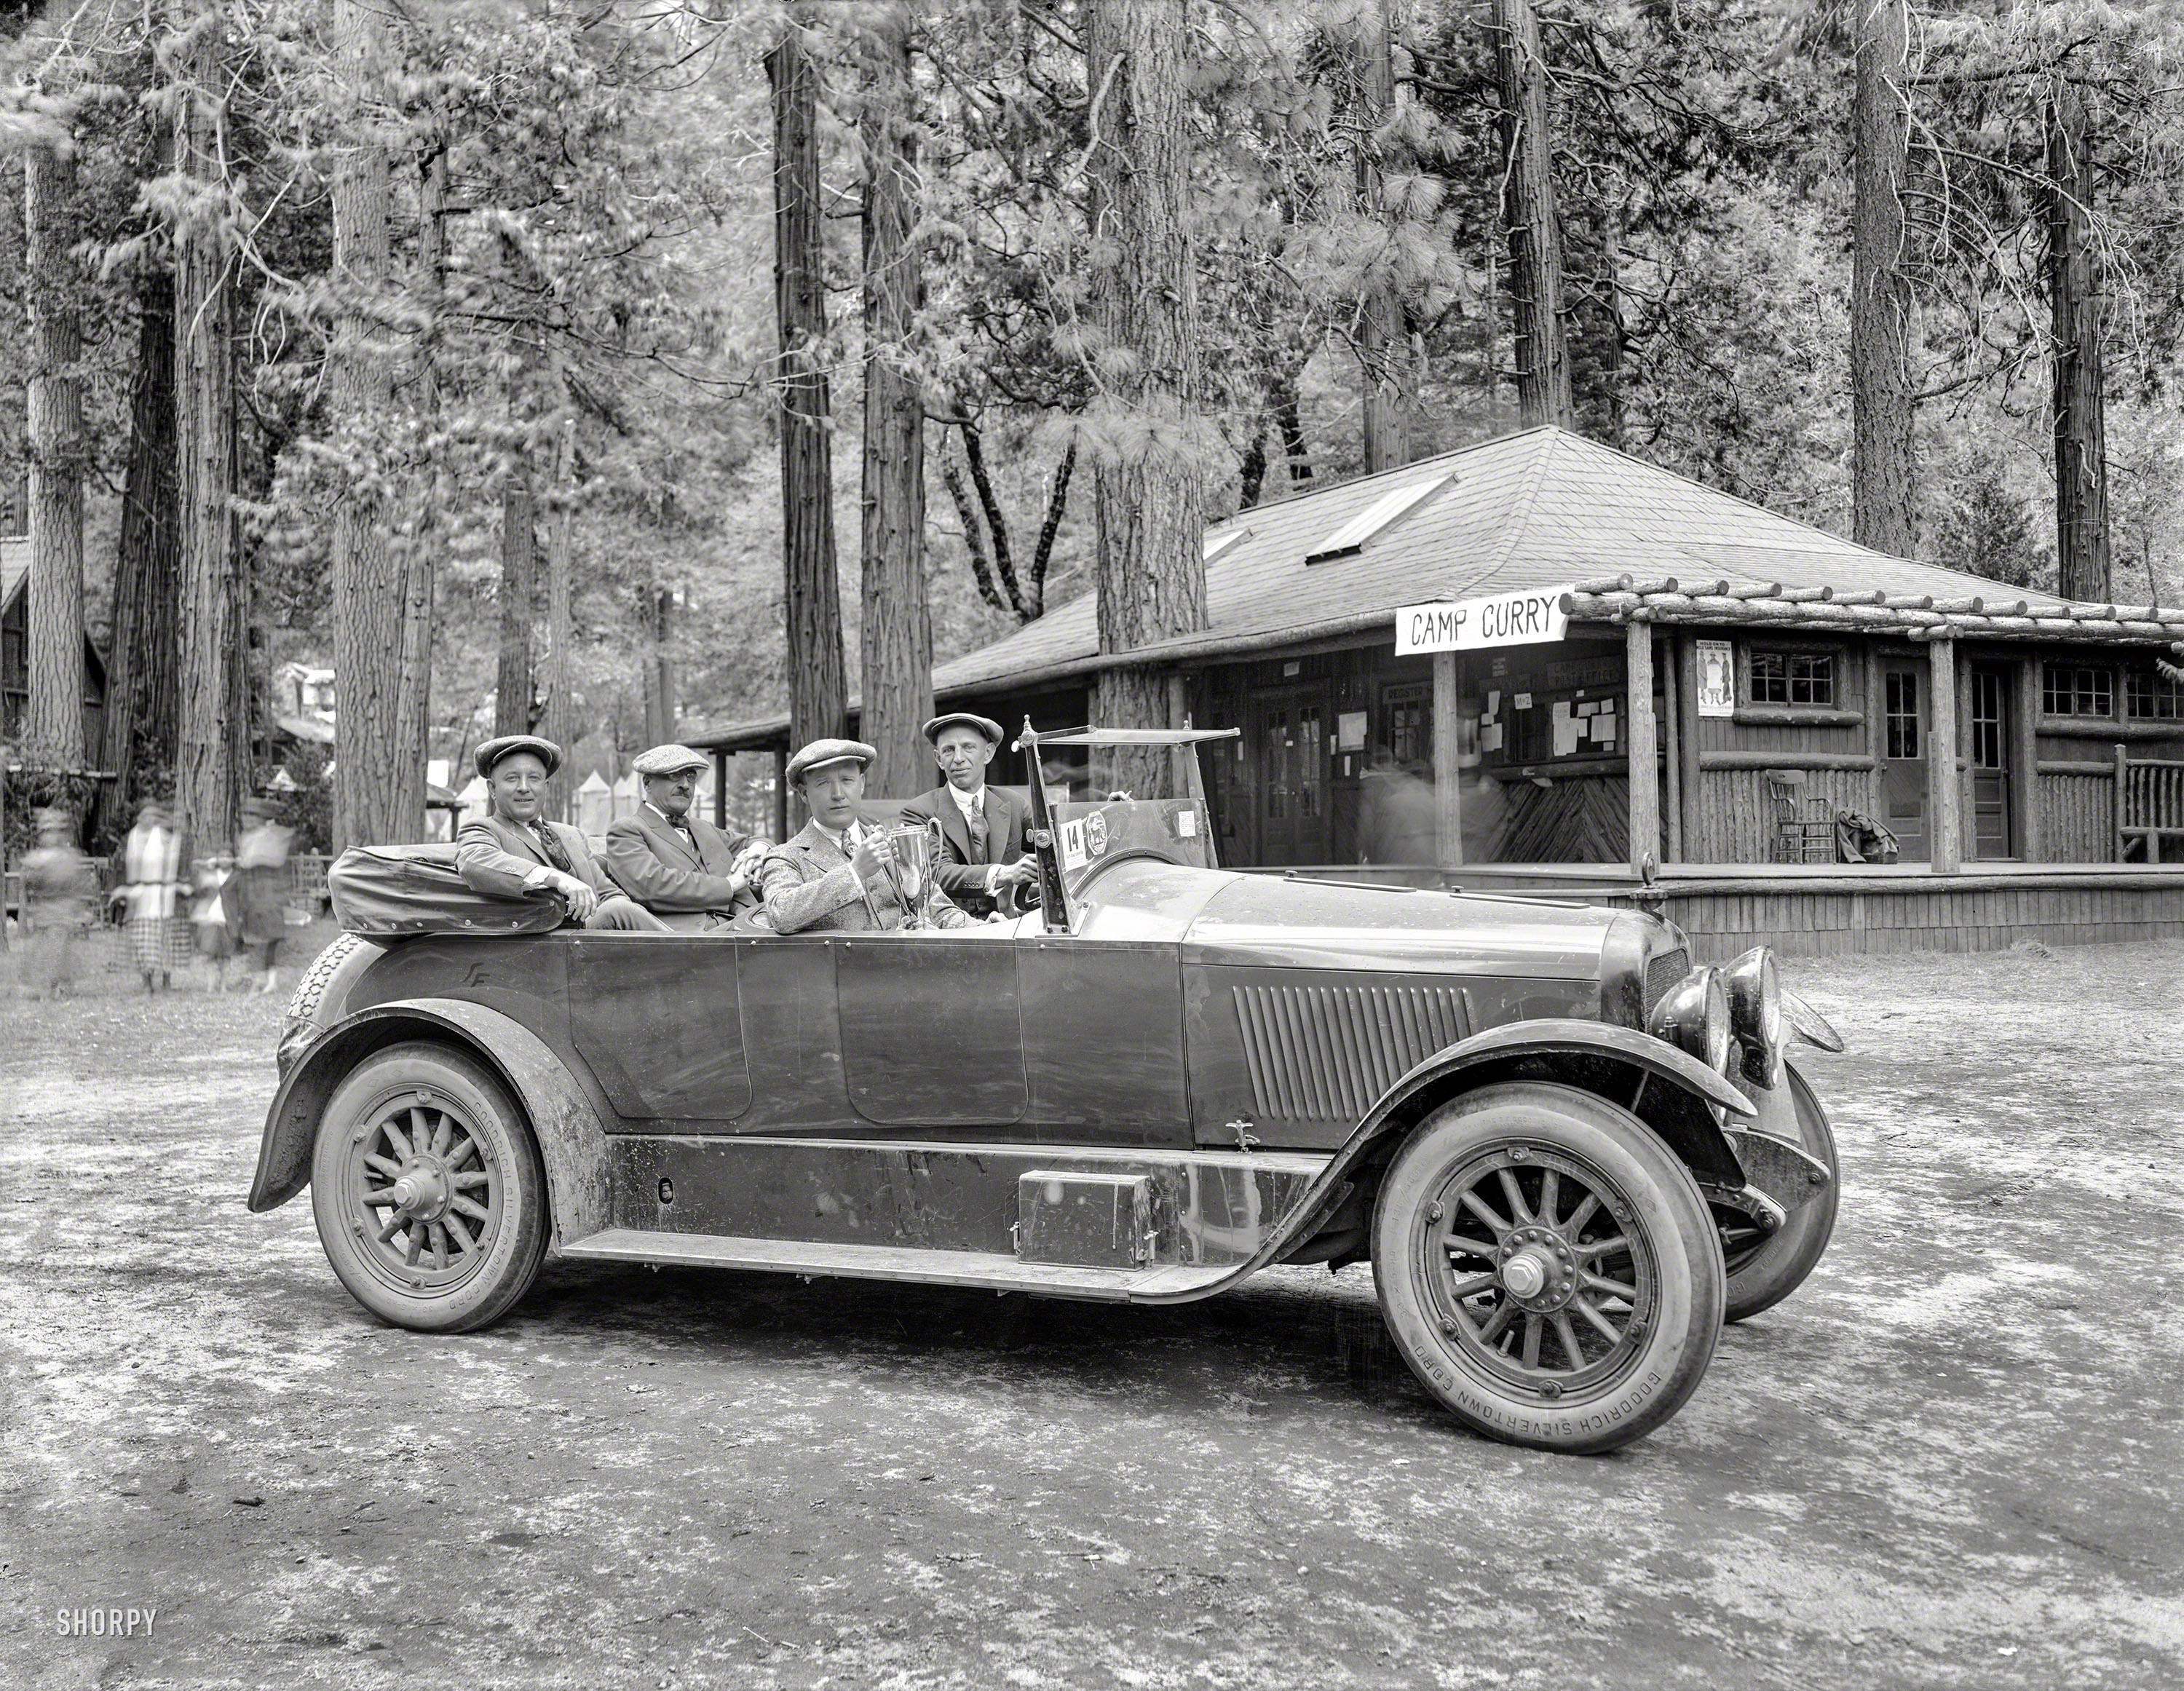 May 1920. Yosemite National Park. "Prize Cup, Fourth Annual AAA Economy Run, Los Angeles to Camp Curry." An early test of fuel efficiency sponsored by Standard Oil of California. 8x6 inch glass negative originally from the Wyland Stanley collection of San Francisciana, acquired and scanned by Shorpy. View full size.